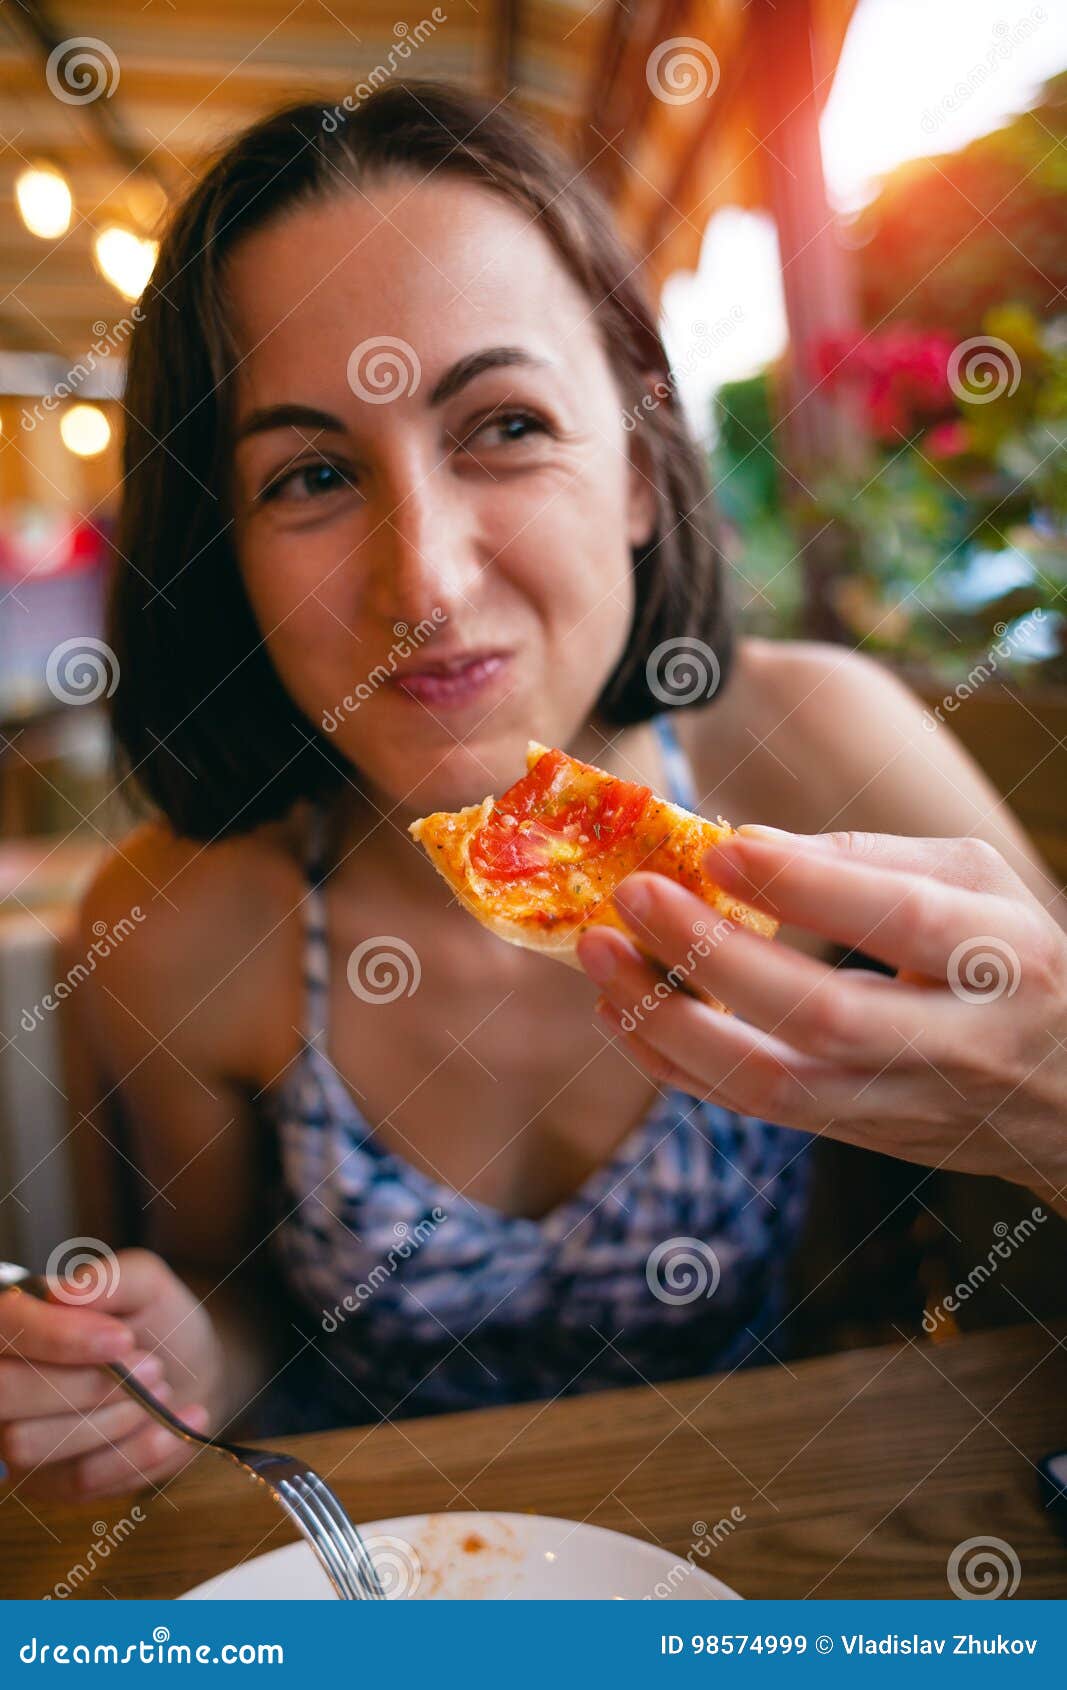 The Girl Is Eating Pizza Stock Im